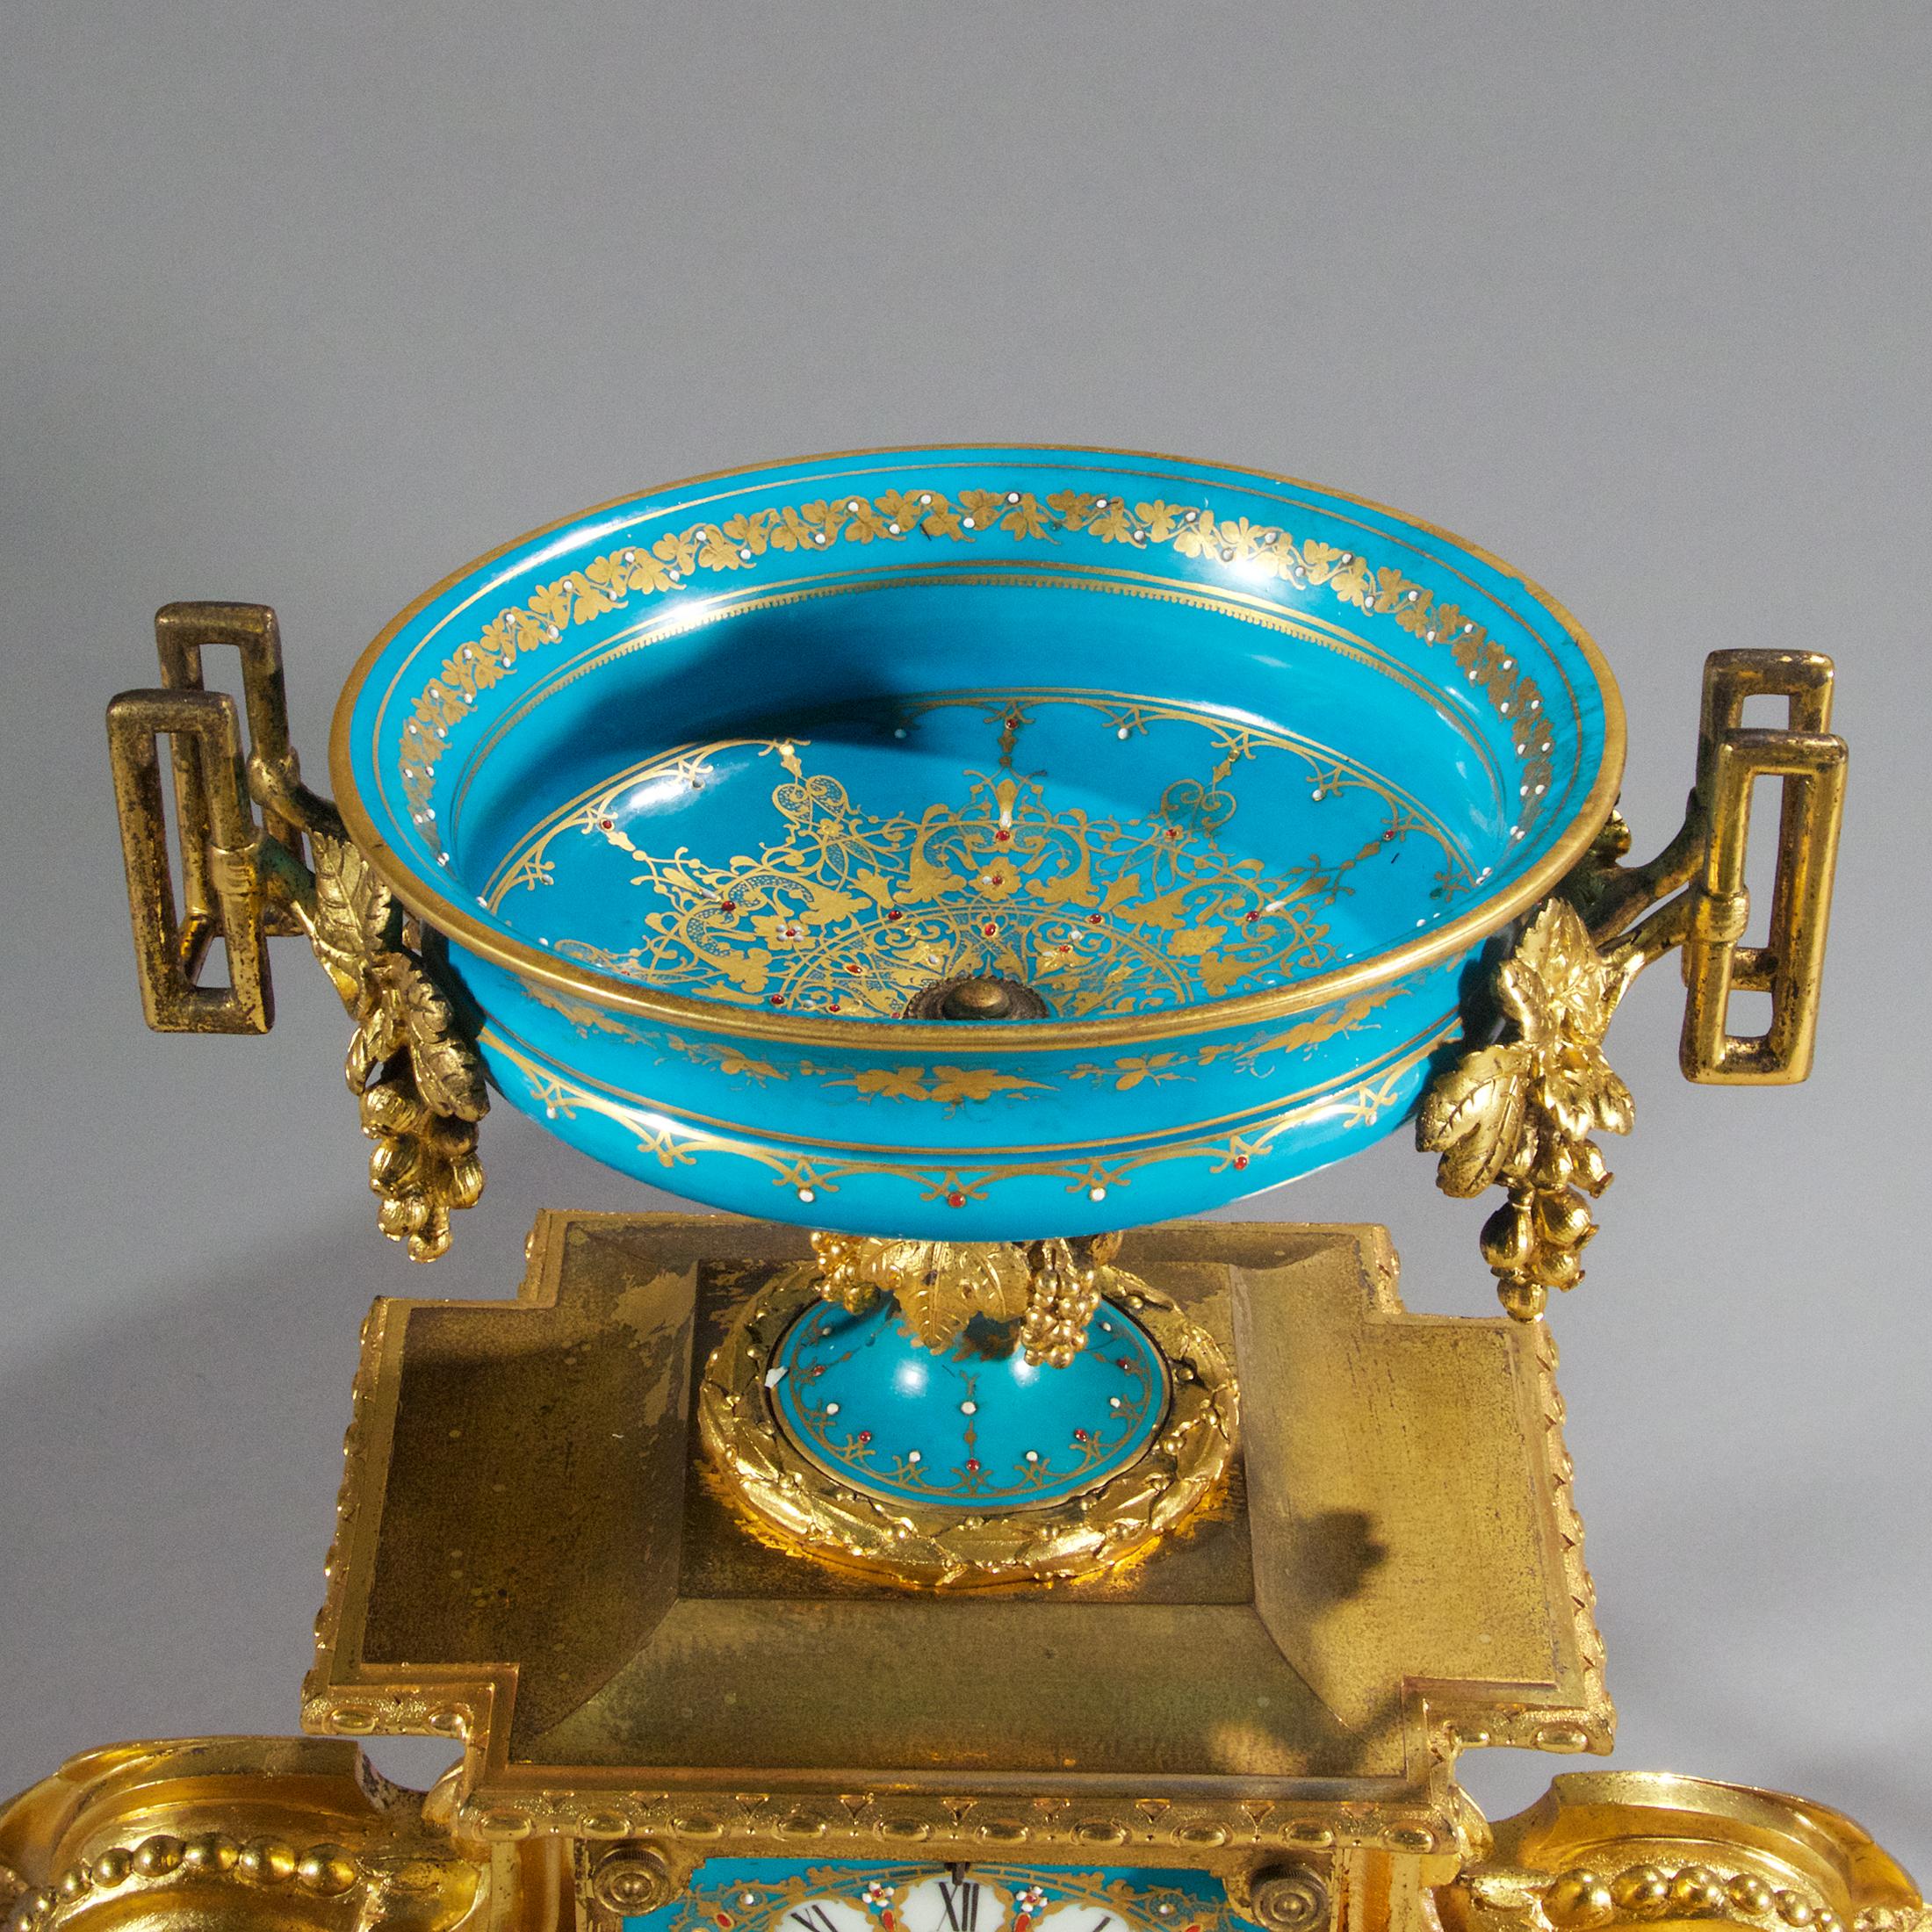 Fine Quality Sèvres-style Louis XVI Gilt-Bronze and Porcelain Mantel Clock In Good Condition For Sale In New York, NY